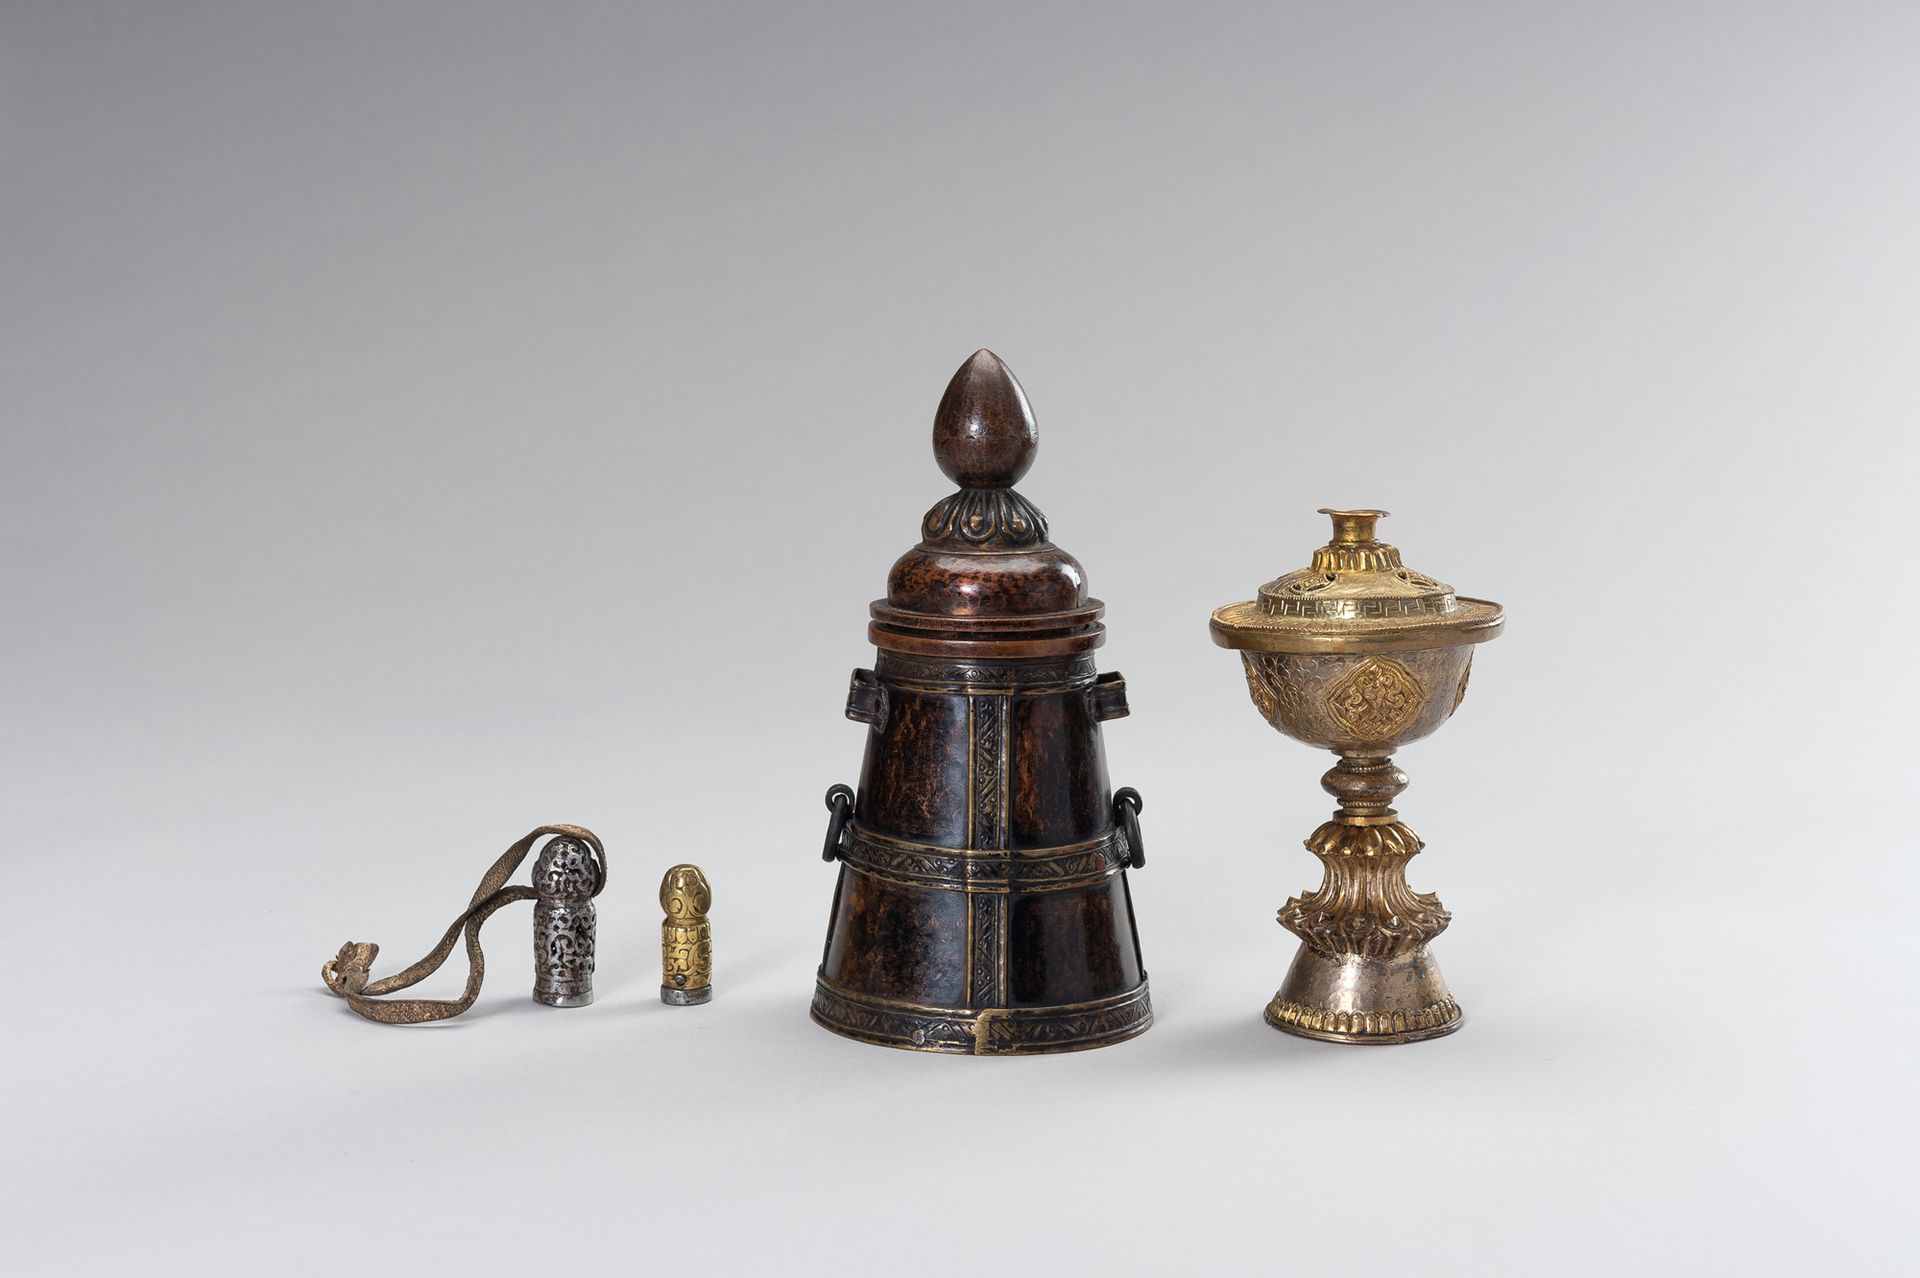 A GROUP OF TWO SEALS, A TSAMPA VESSEL AND A BUTTER LAMP 一组两个印章，一个Thampa容器和一个奶油灯
&hellip;